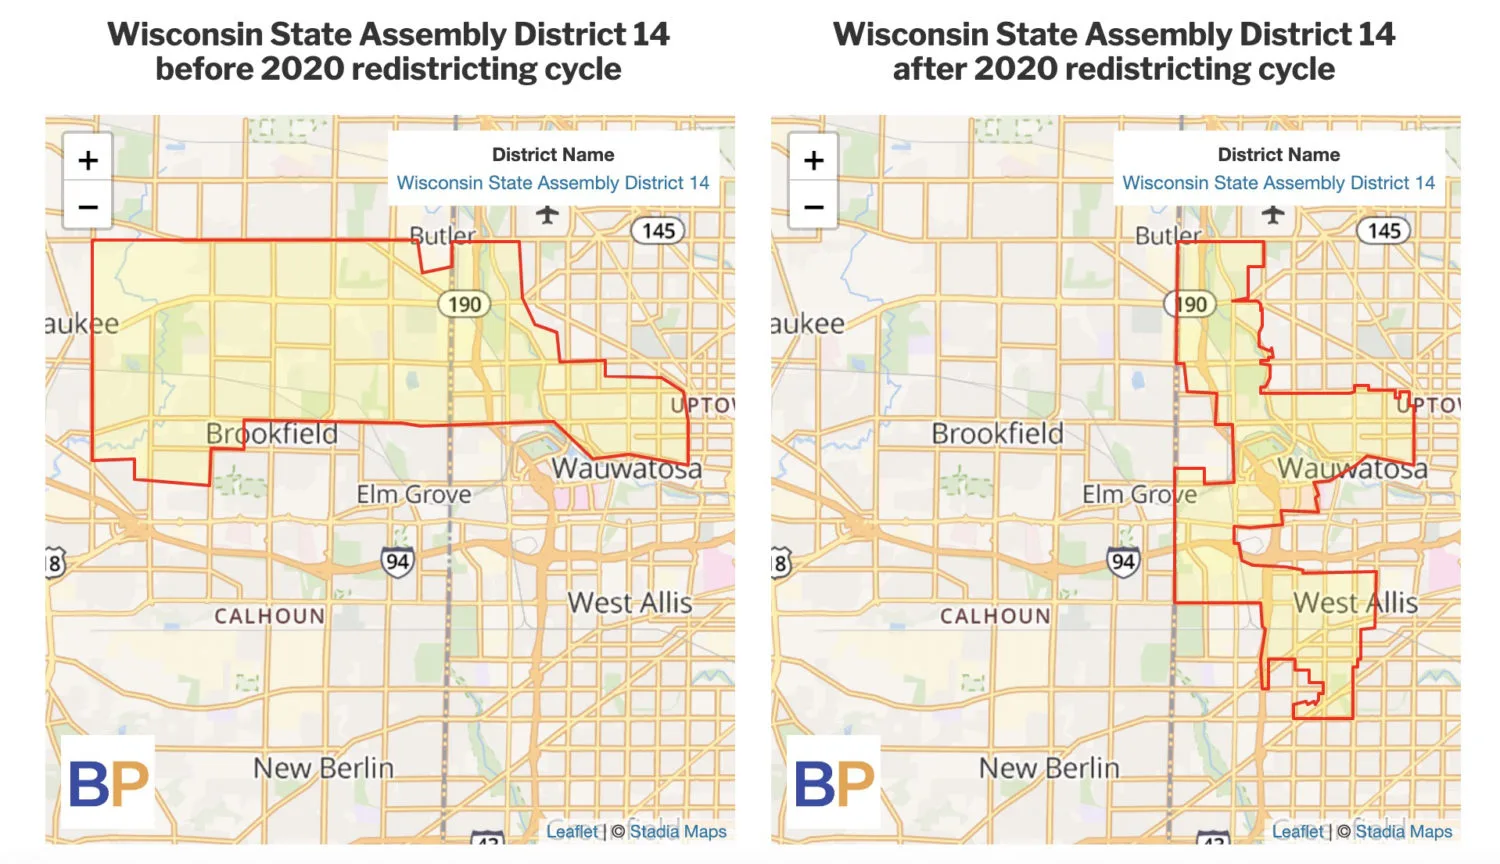 Map of Wisconsin District before and after redistricting